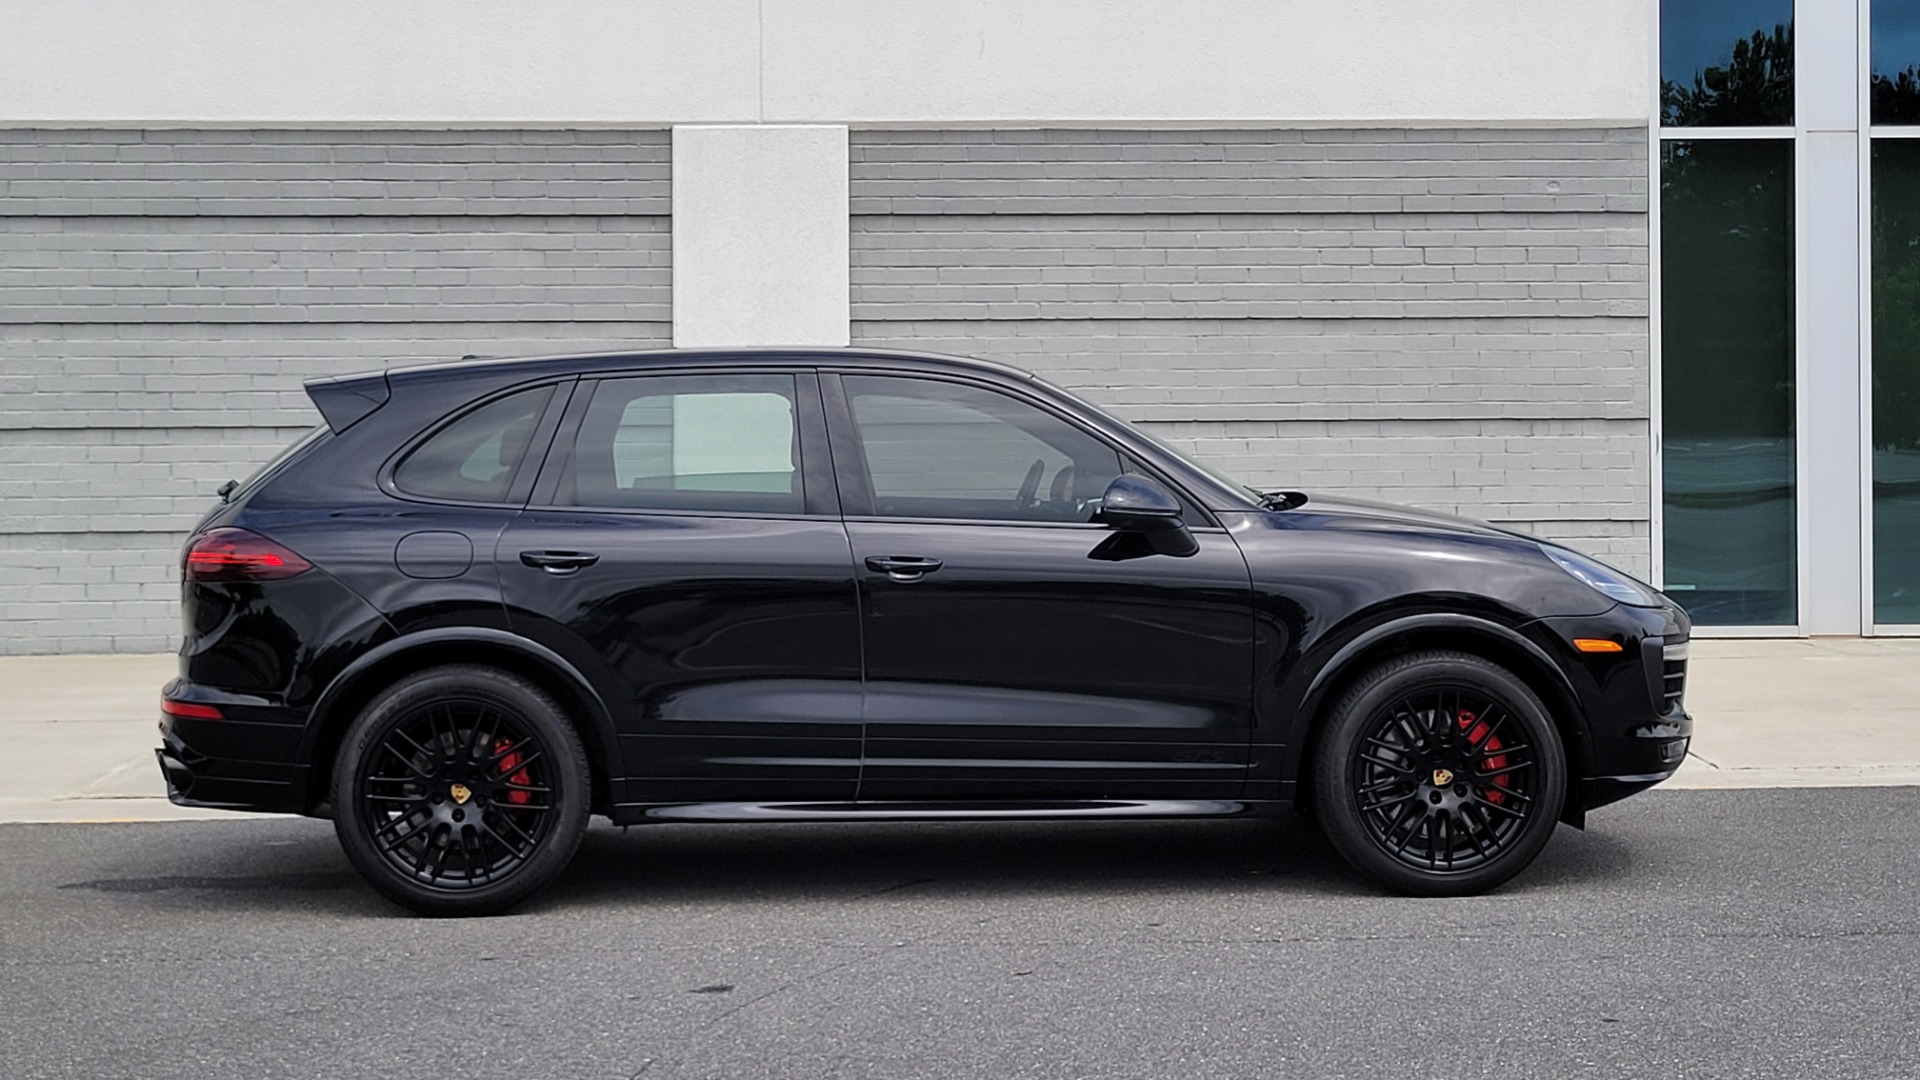 Used 2017 Porsche CAYENNE GTS 3.6L / NAV / SUNROOF / BOSE / PARK ASST / LCA / CAMERA for sale $64,995 at Formula Imports in Charlotte NC 28227 7